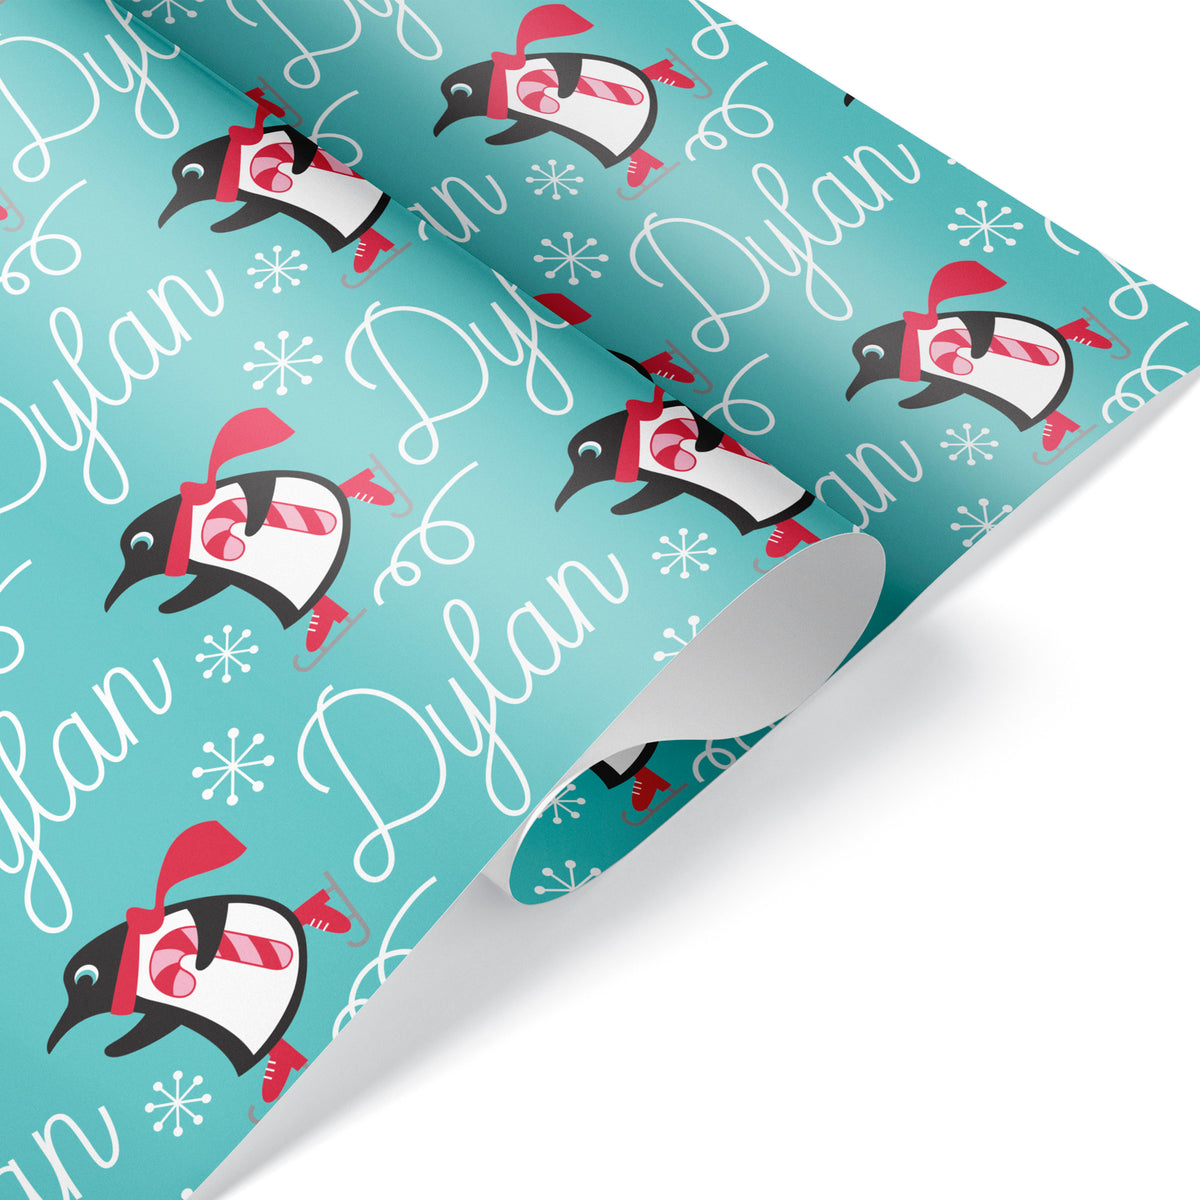 Penguin Ice Skating Christmas Personalized Wrapping Paper - ROBIN